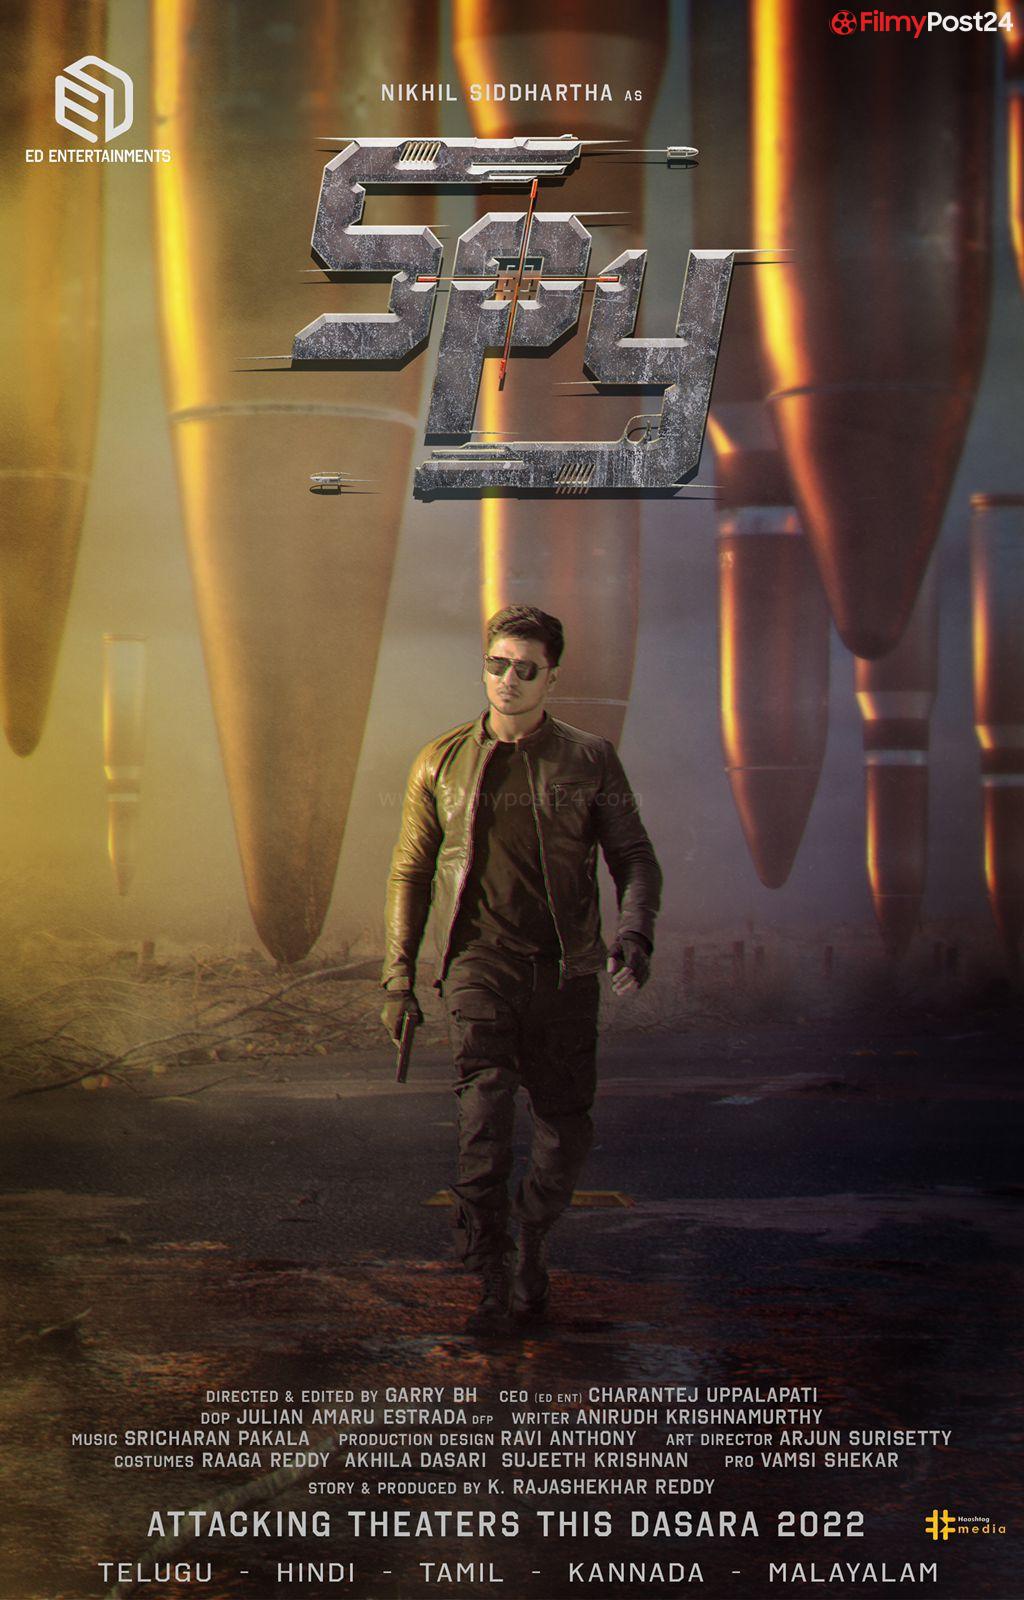 Spy Movie (2022): Nikhil Siddharth | Cast | Trailer | Songs | First Look | Release Date